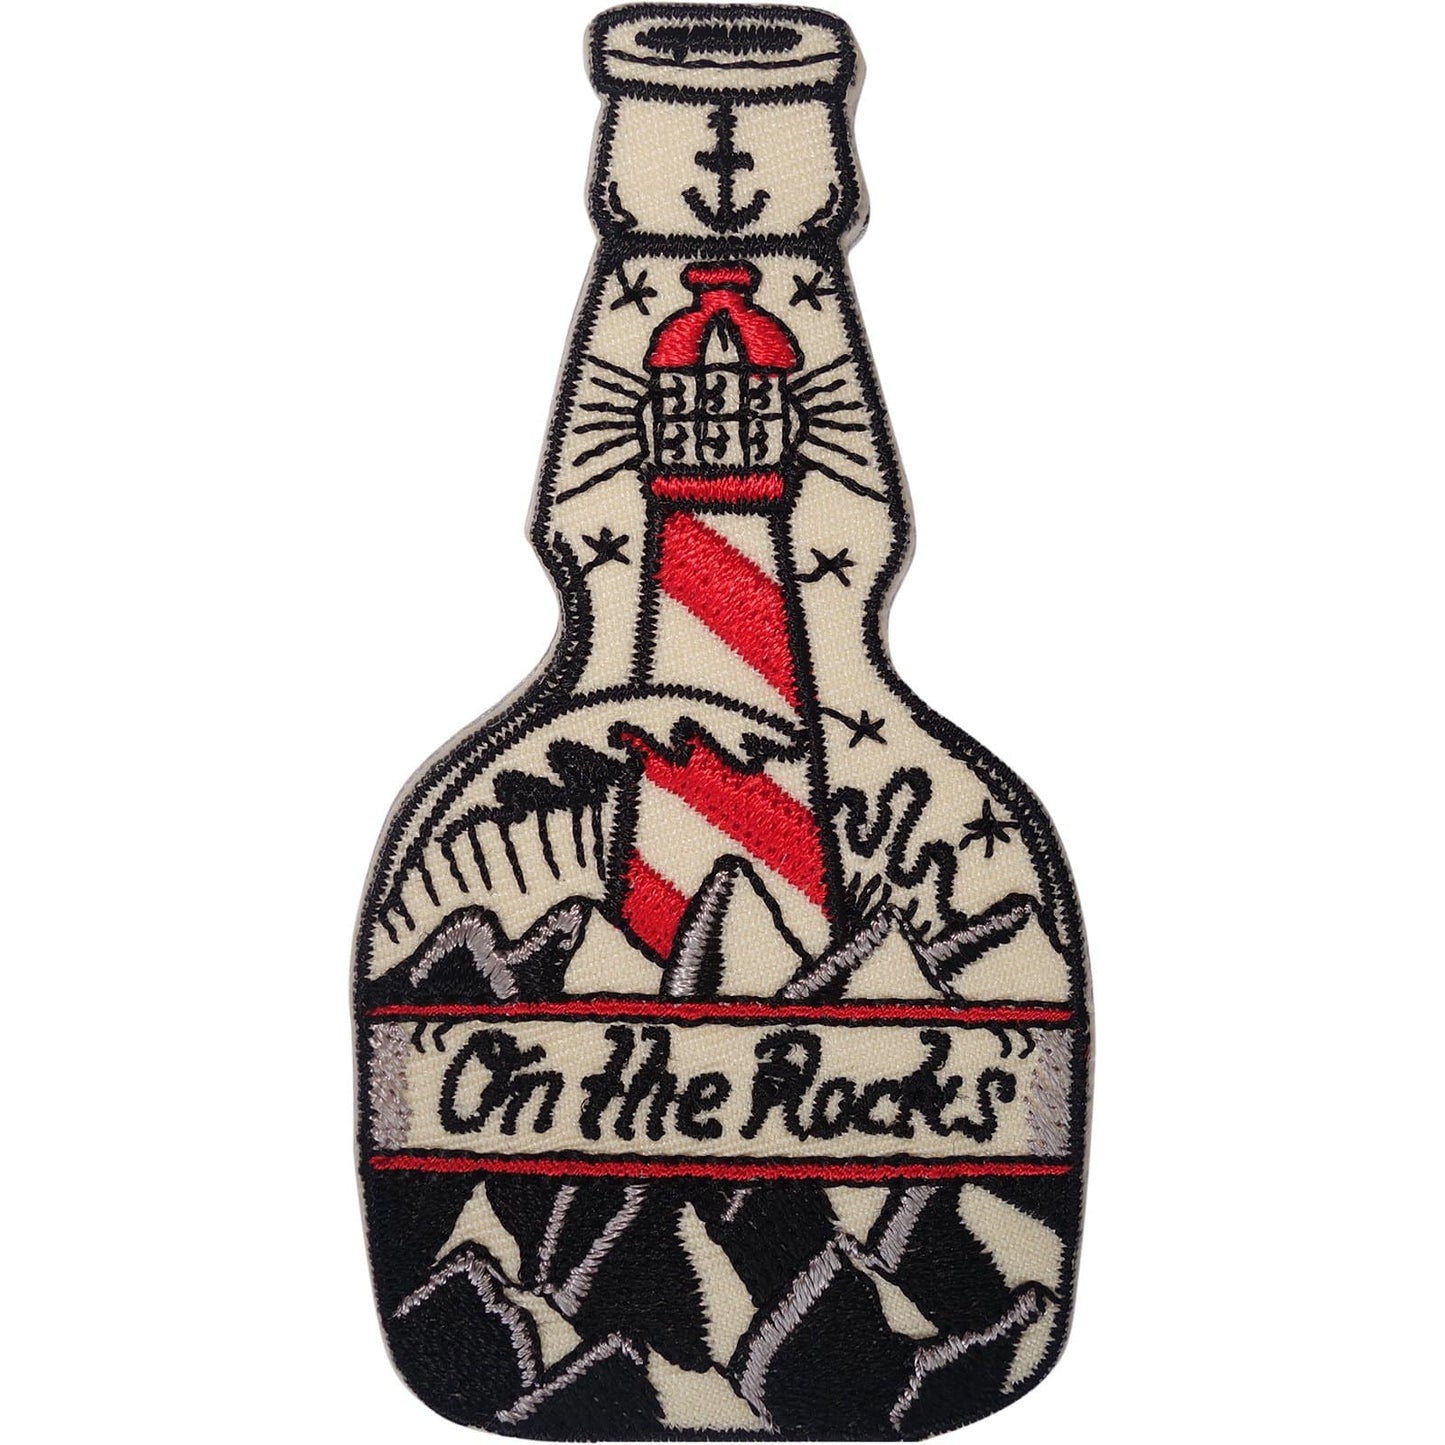 Lighthouse Patch Iron Sew On Clothes Bag Whisky Bottle Anchor Embroidered Badge